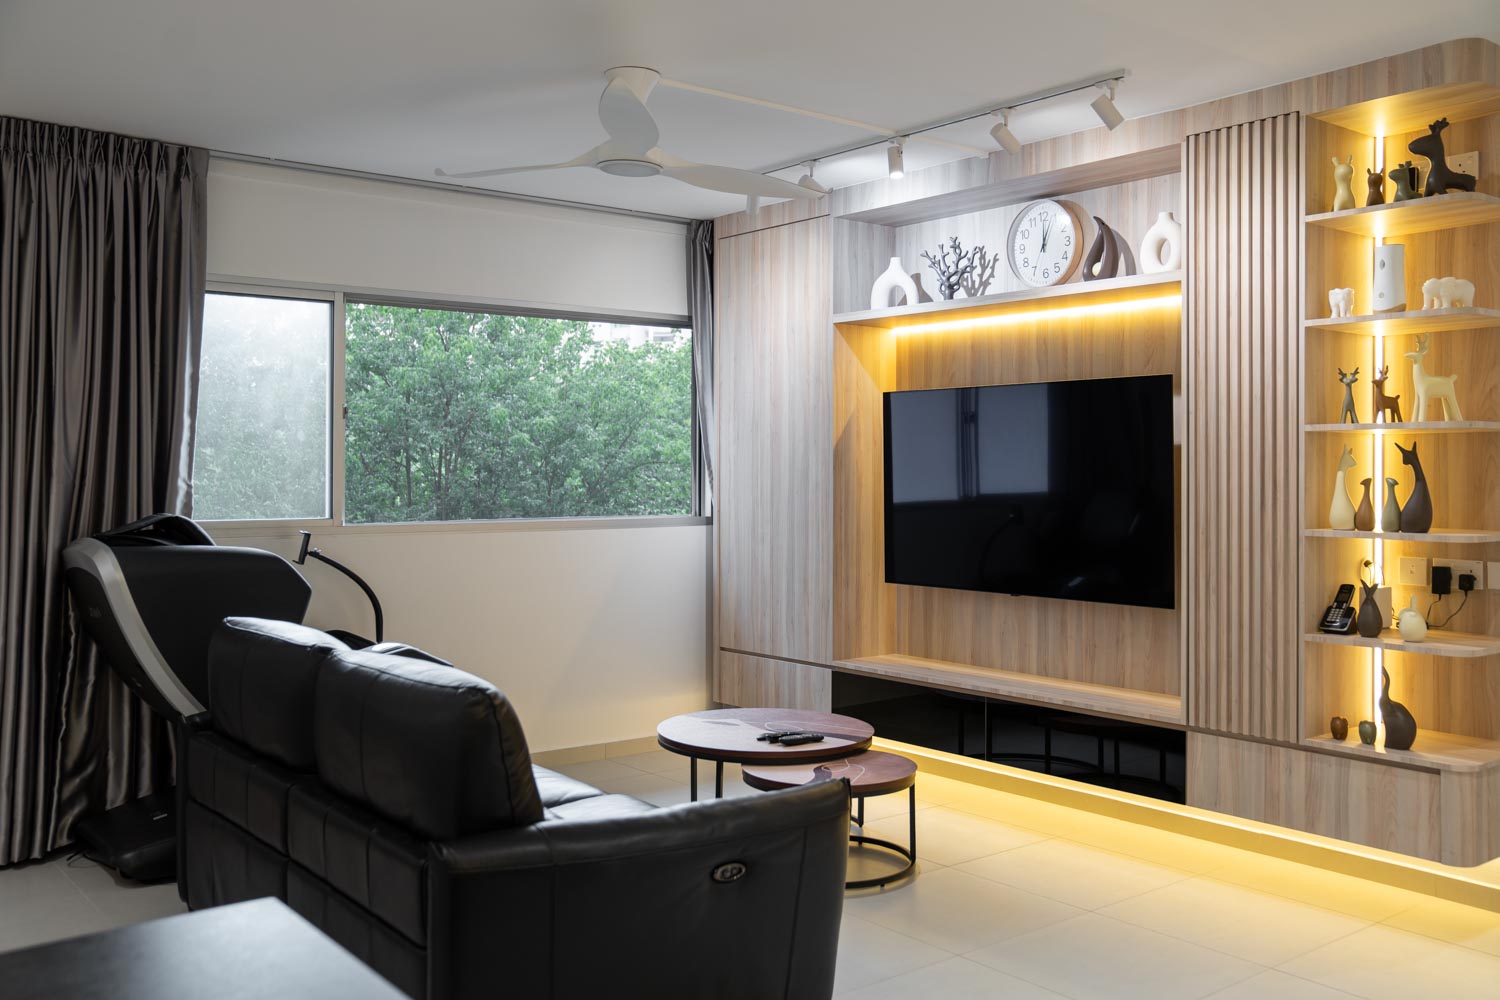 Contemporary, Modern, Others Design - Living Room - HDB 4 Room - Design by Design 4 Space Pte Ltd